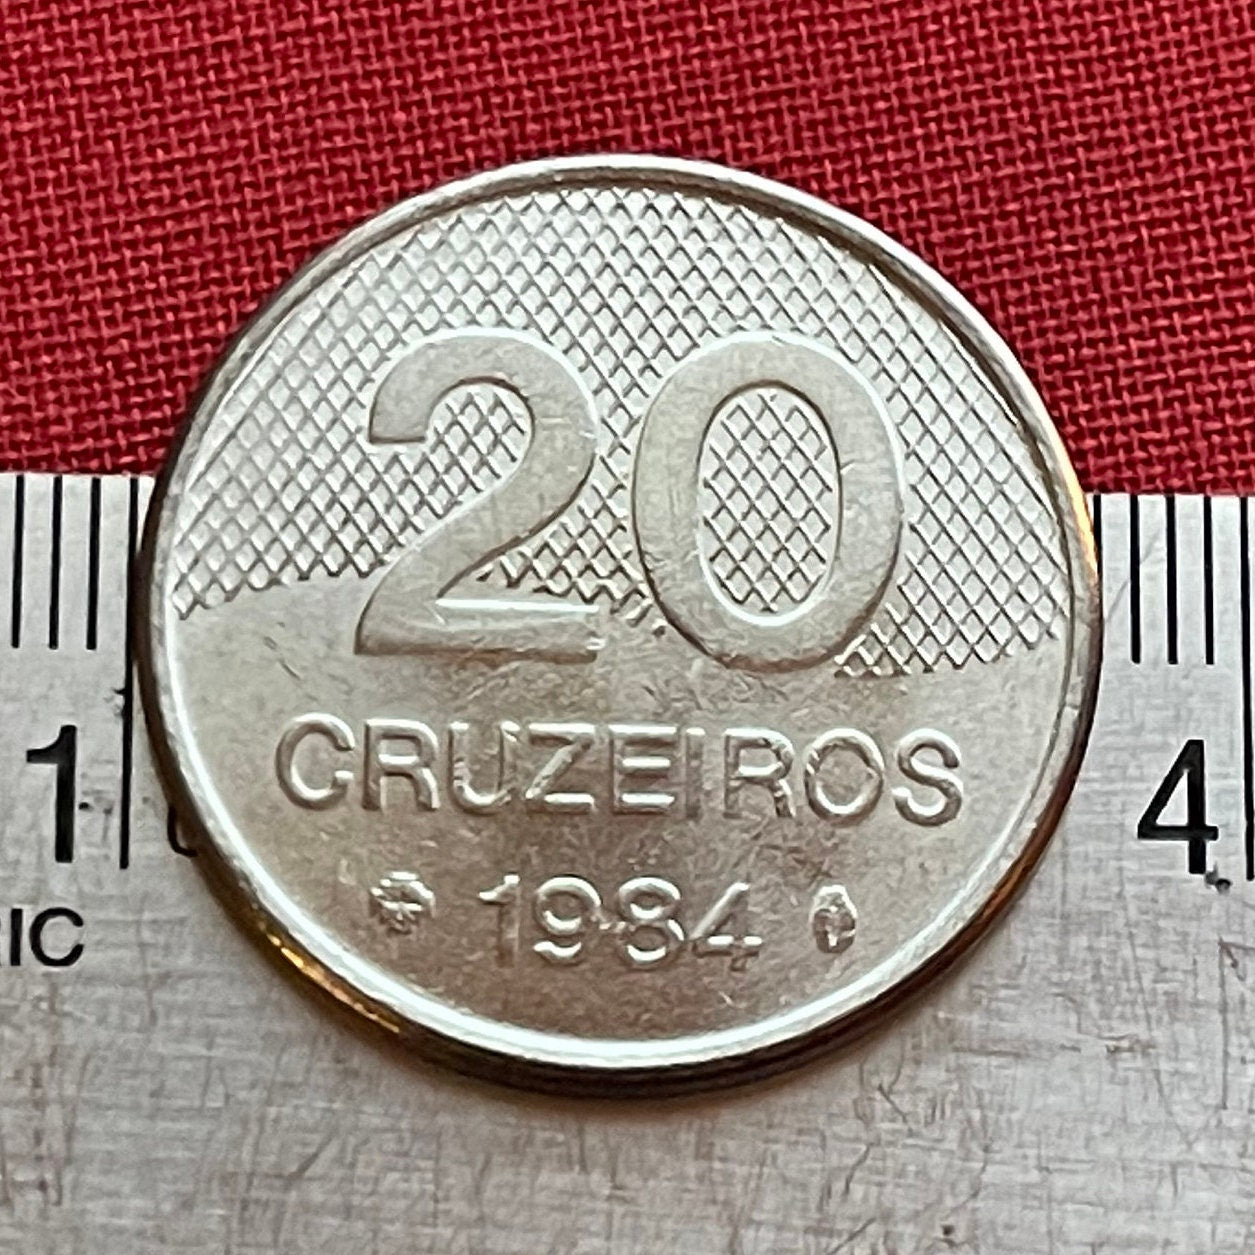 Church of Saint Francis 20 Cruzieros Brazil Authentic Coin Money for Jewelry and Craft Making (Francis of Assisi) (Aleijadinho)